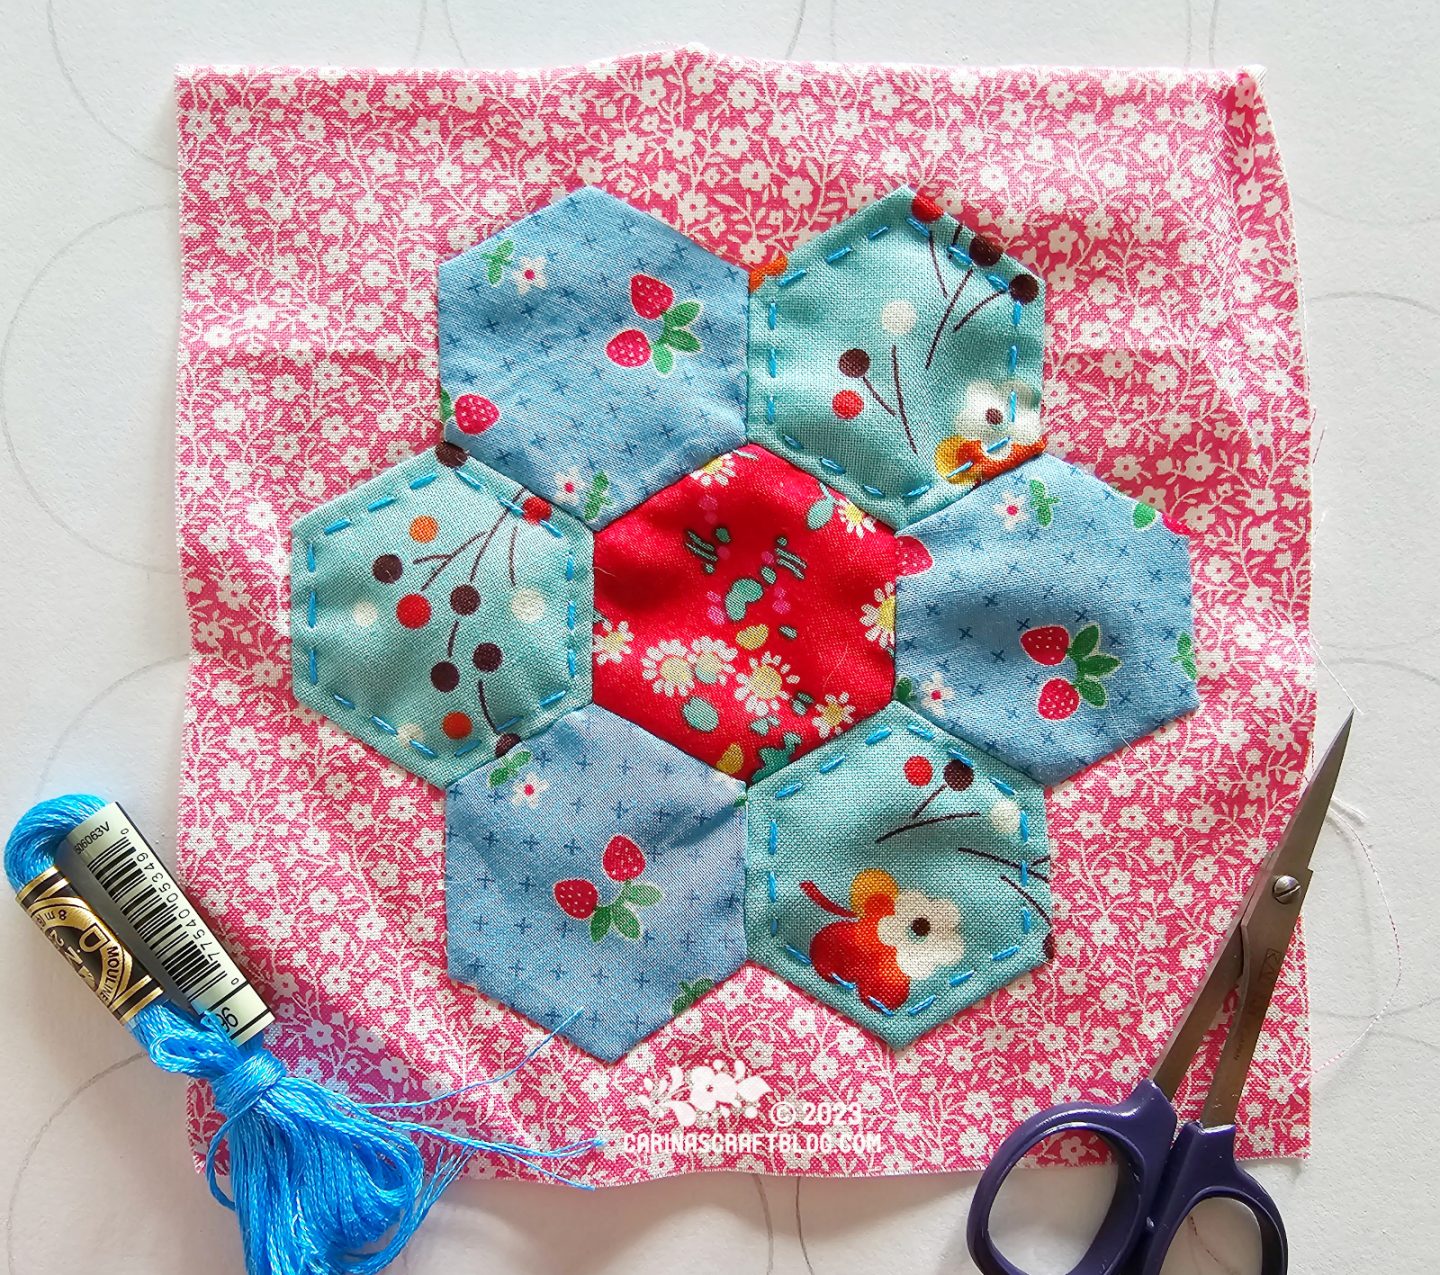 A pink square of fabric with a print of tiny white flowers. On the fabric are appliquéd seven fabric hexagons, a red hexagon in the centre with alternating blue and turquoise hexagons around it.